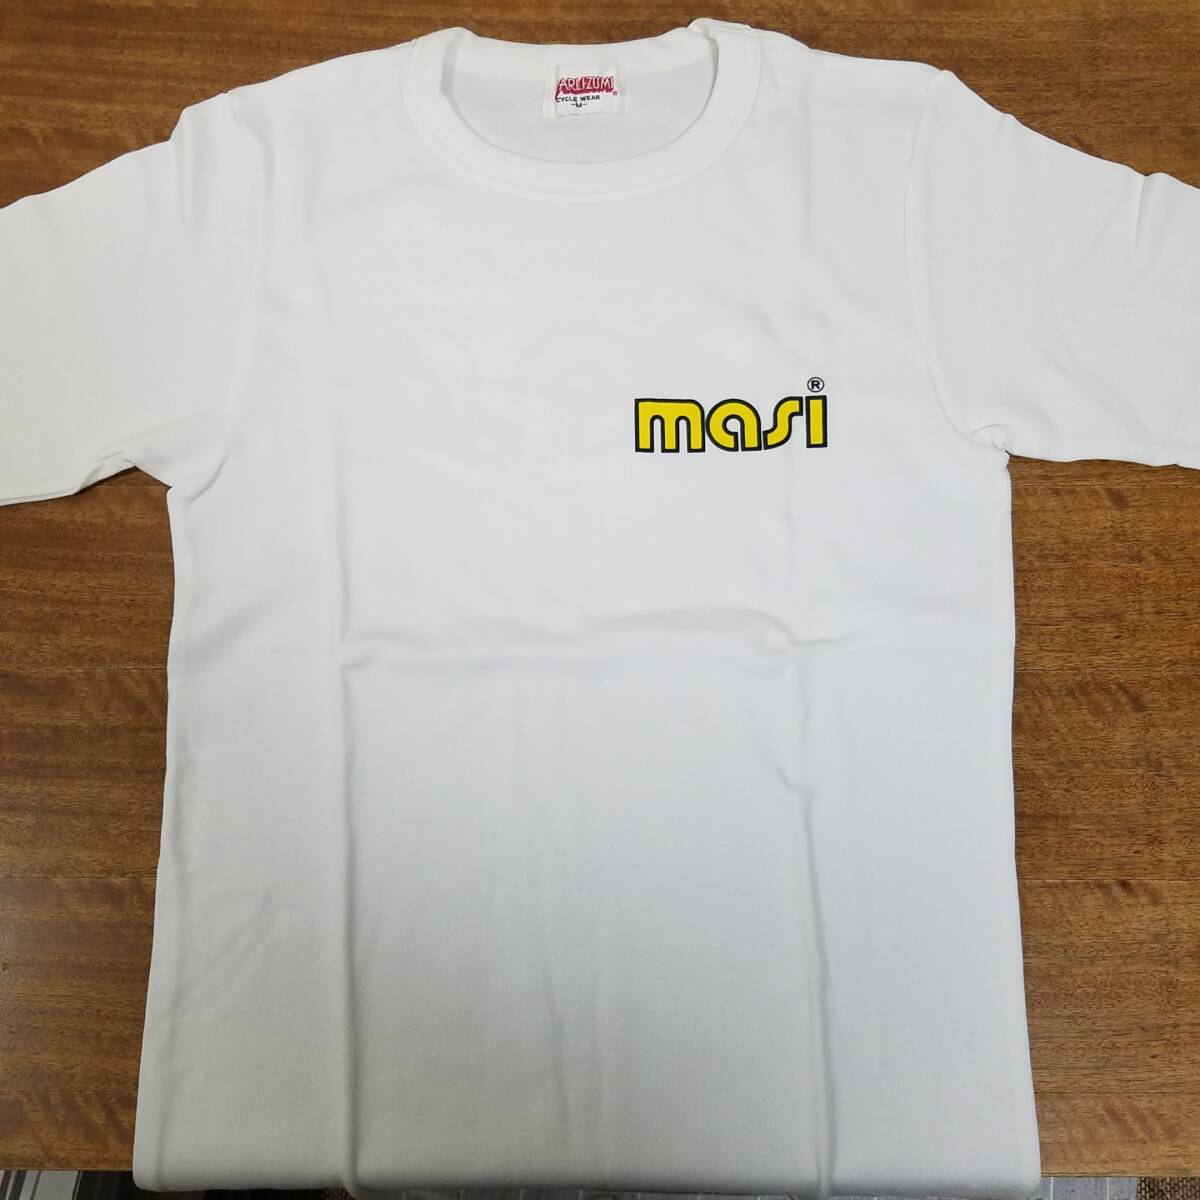 masi Tシャツ(М)　MADE IN JAPAN PEARL IZUMI CYCLE WEAR 　New Old Stock (NOS) 未使用品 ビンテージ_画像4